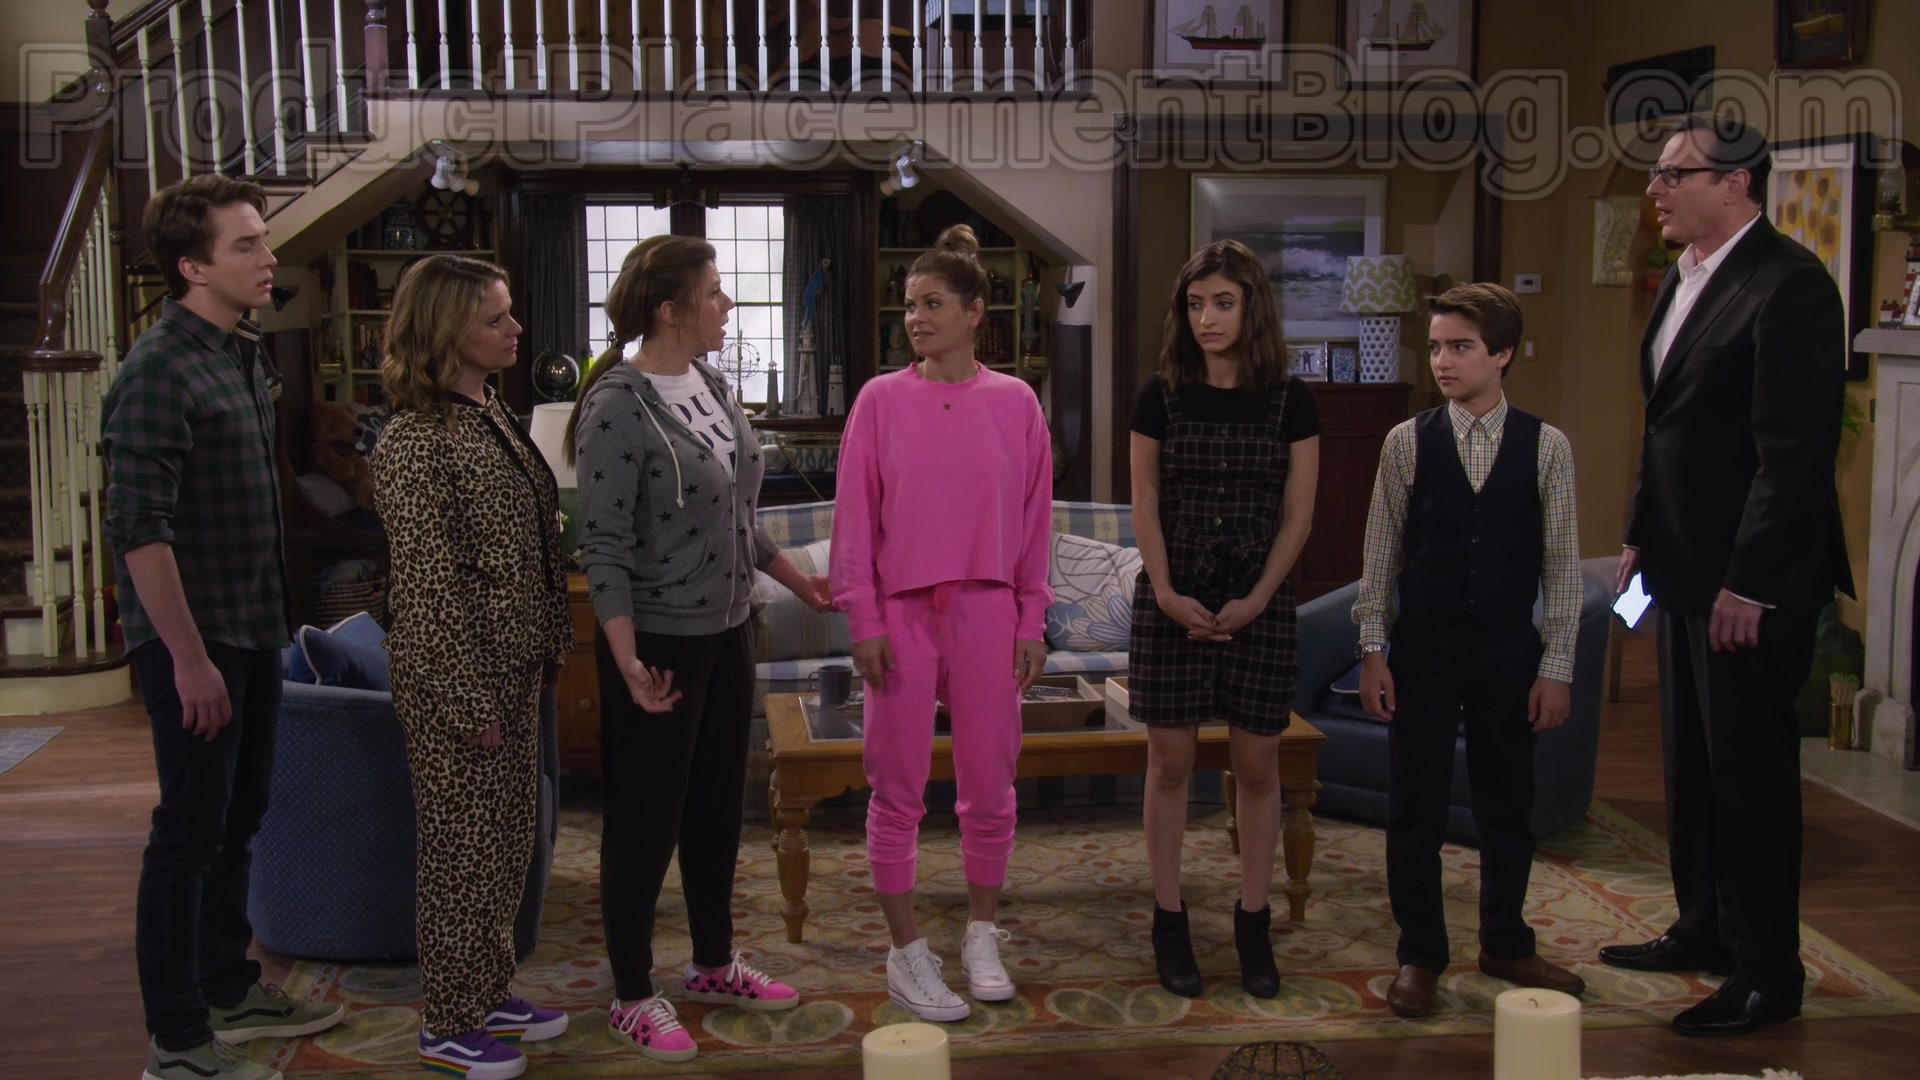 Abierto álbum de recortes sobras Vans Old Skool V Rainbow Platform Sneakers Of Candace Cameron Bure As D.J.  Tanner-Fuller In Fuller House S05E18 "Our Very Last Show, Again" (2020)